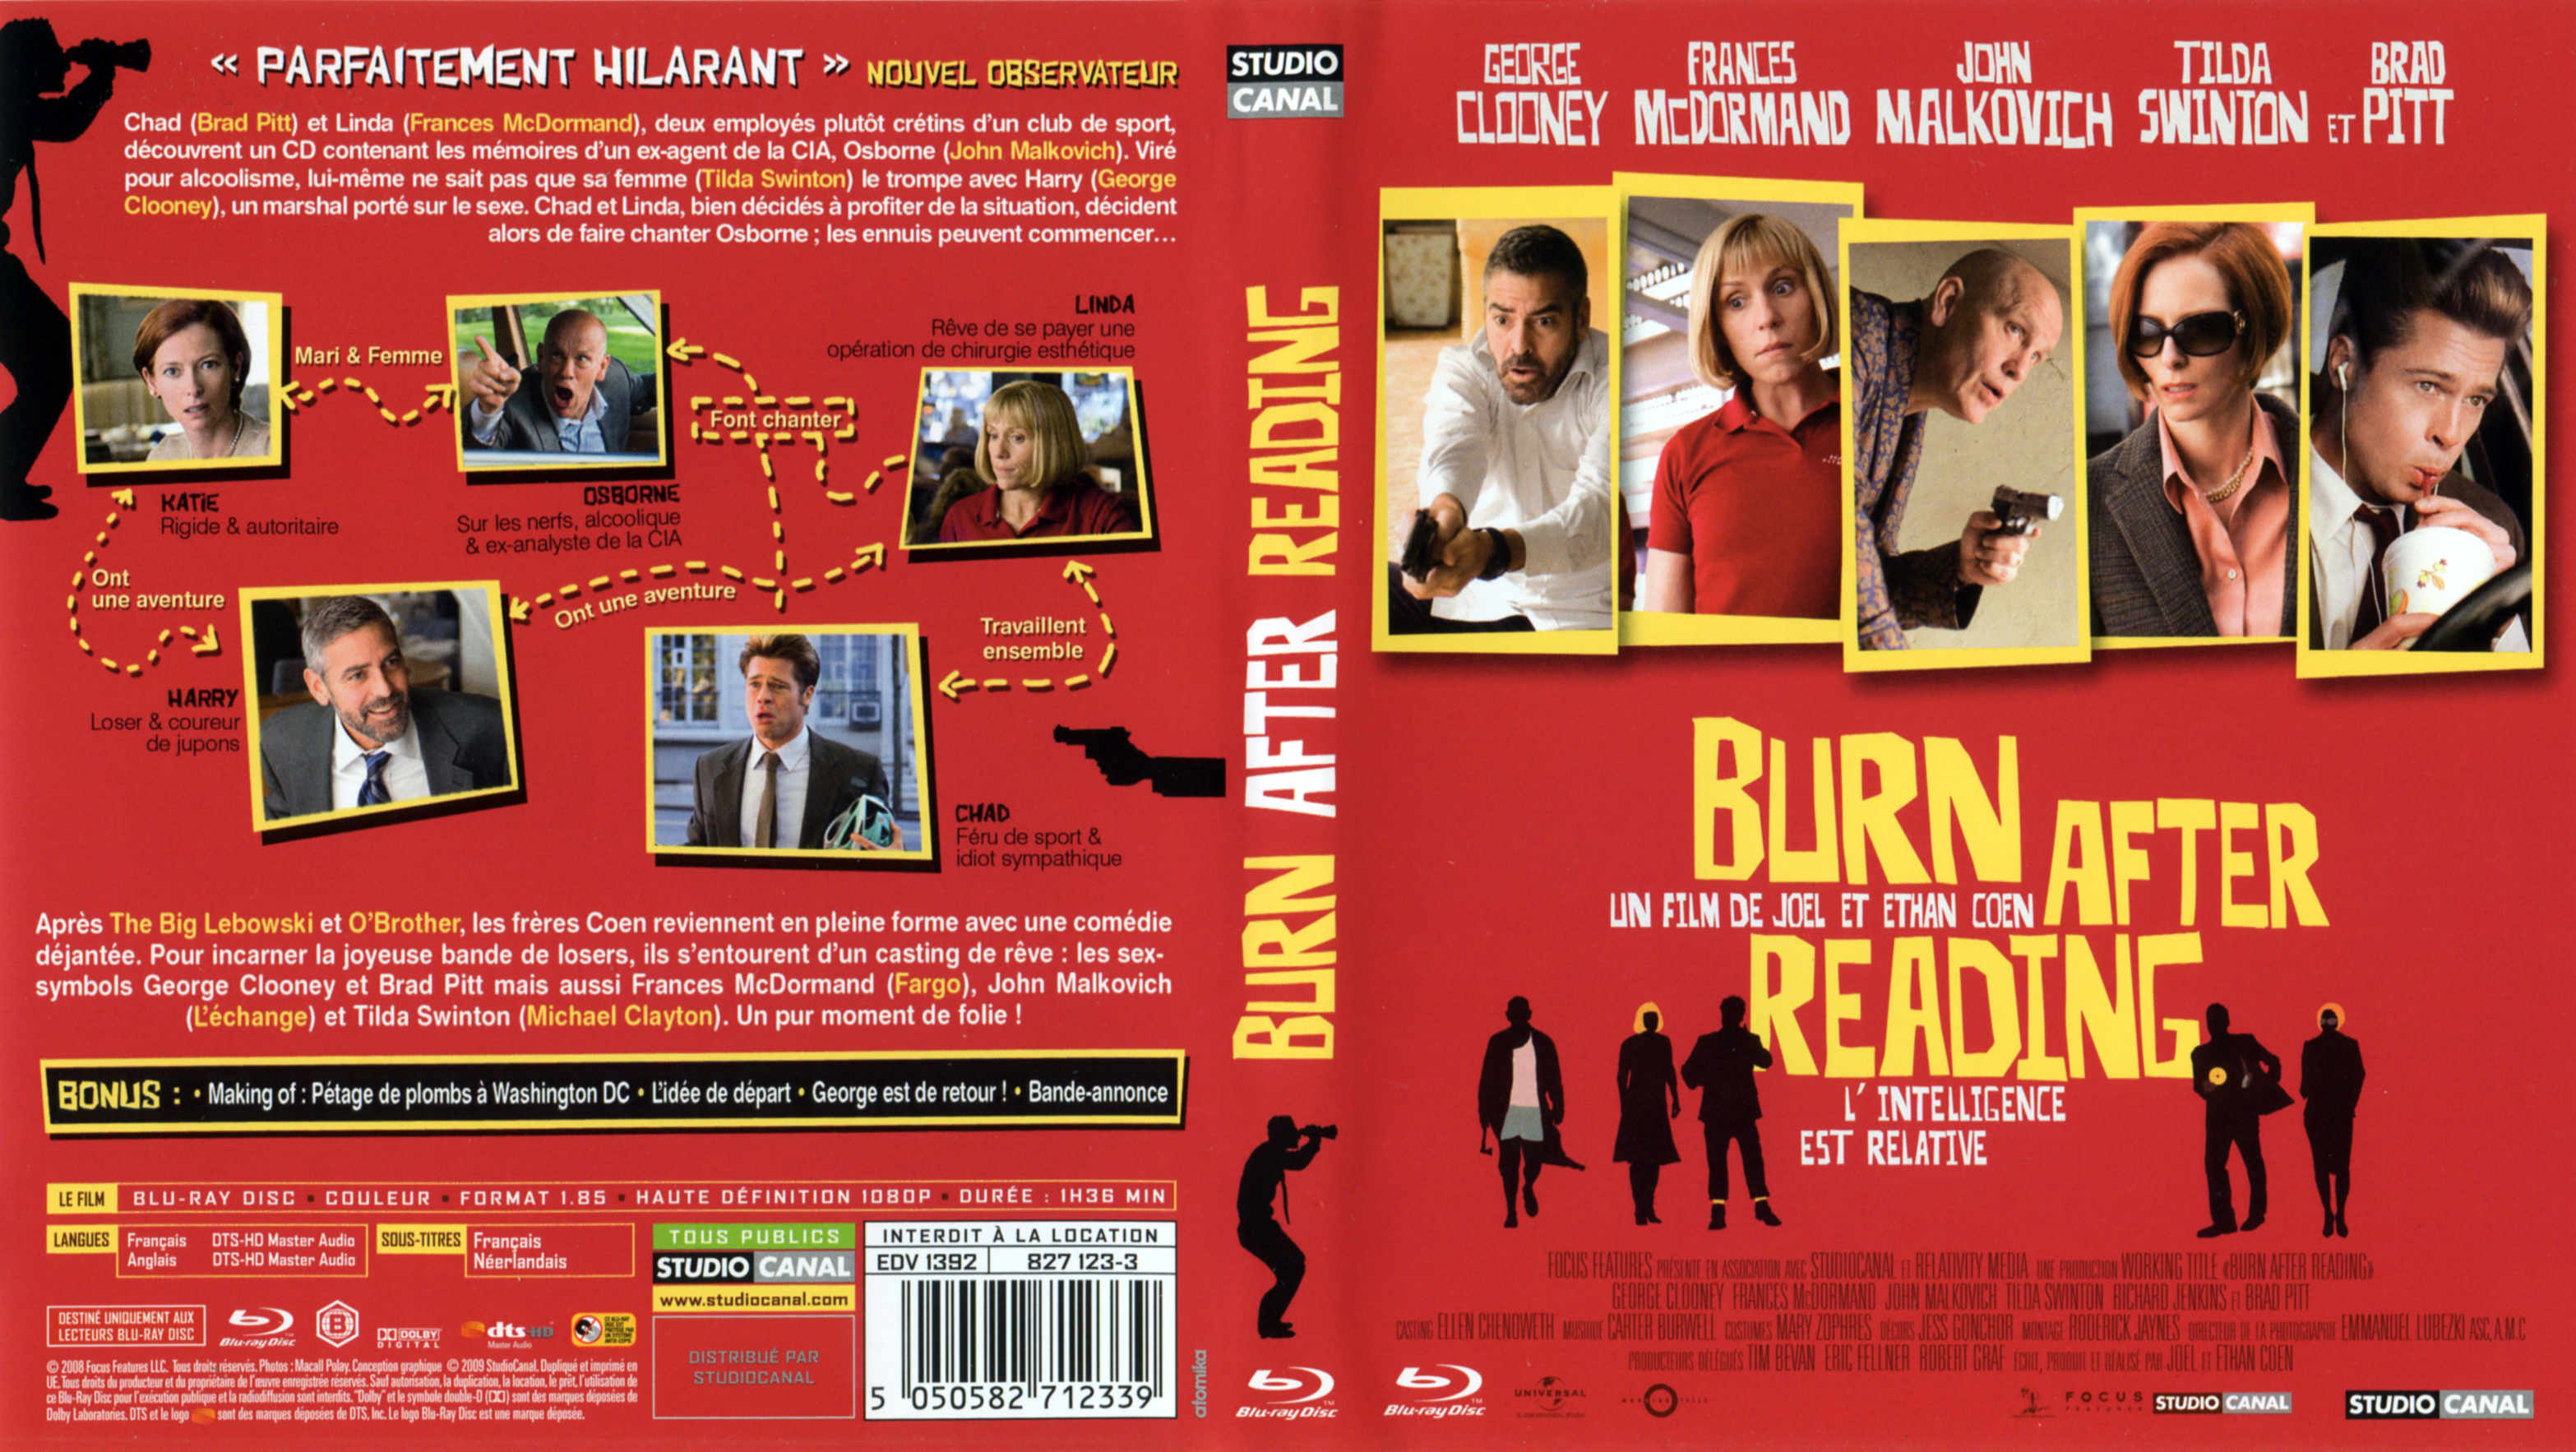 Jaquette DVD Burn after reading (BLU-RAY)